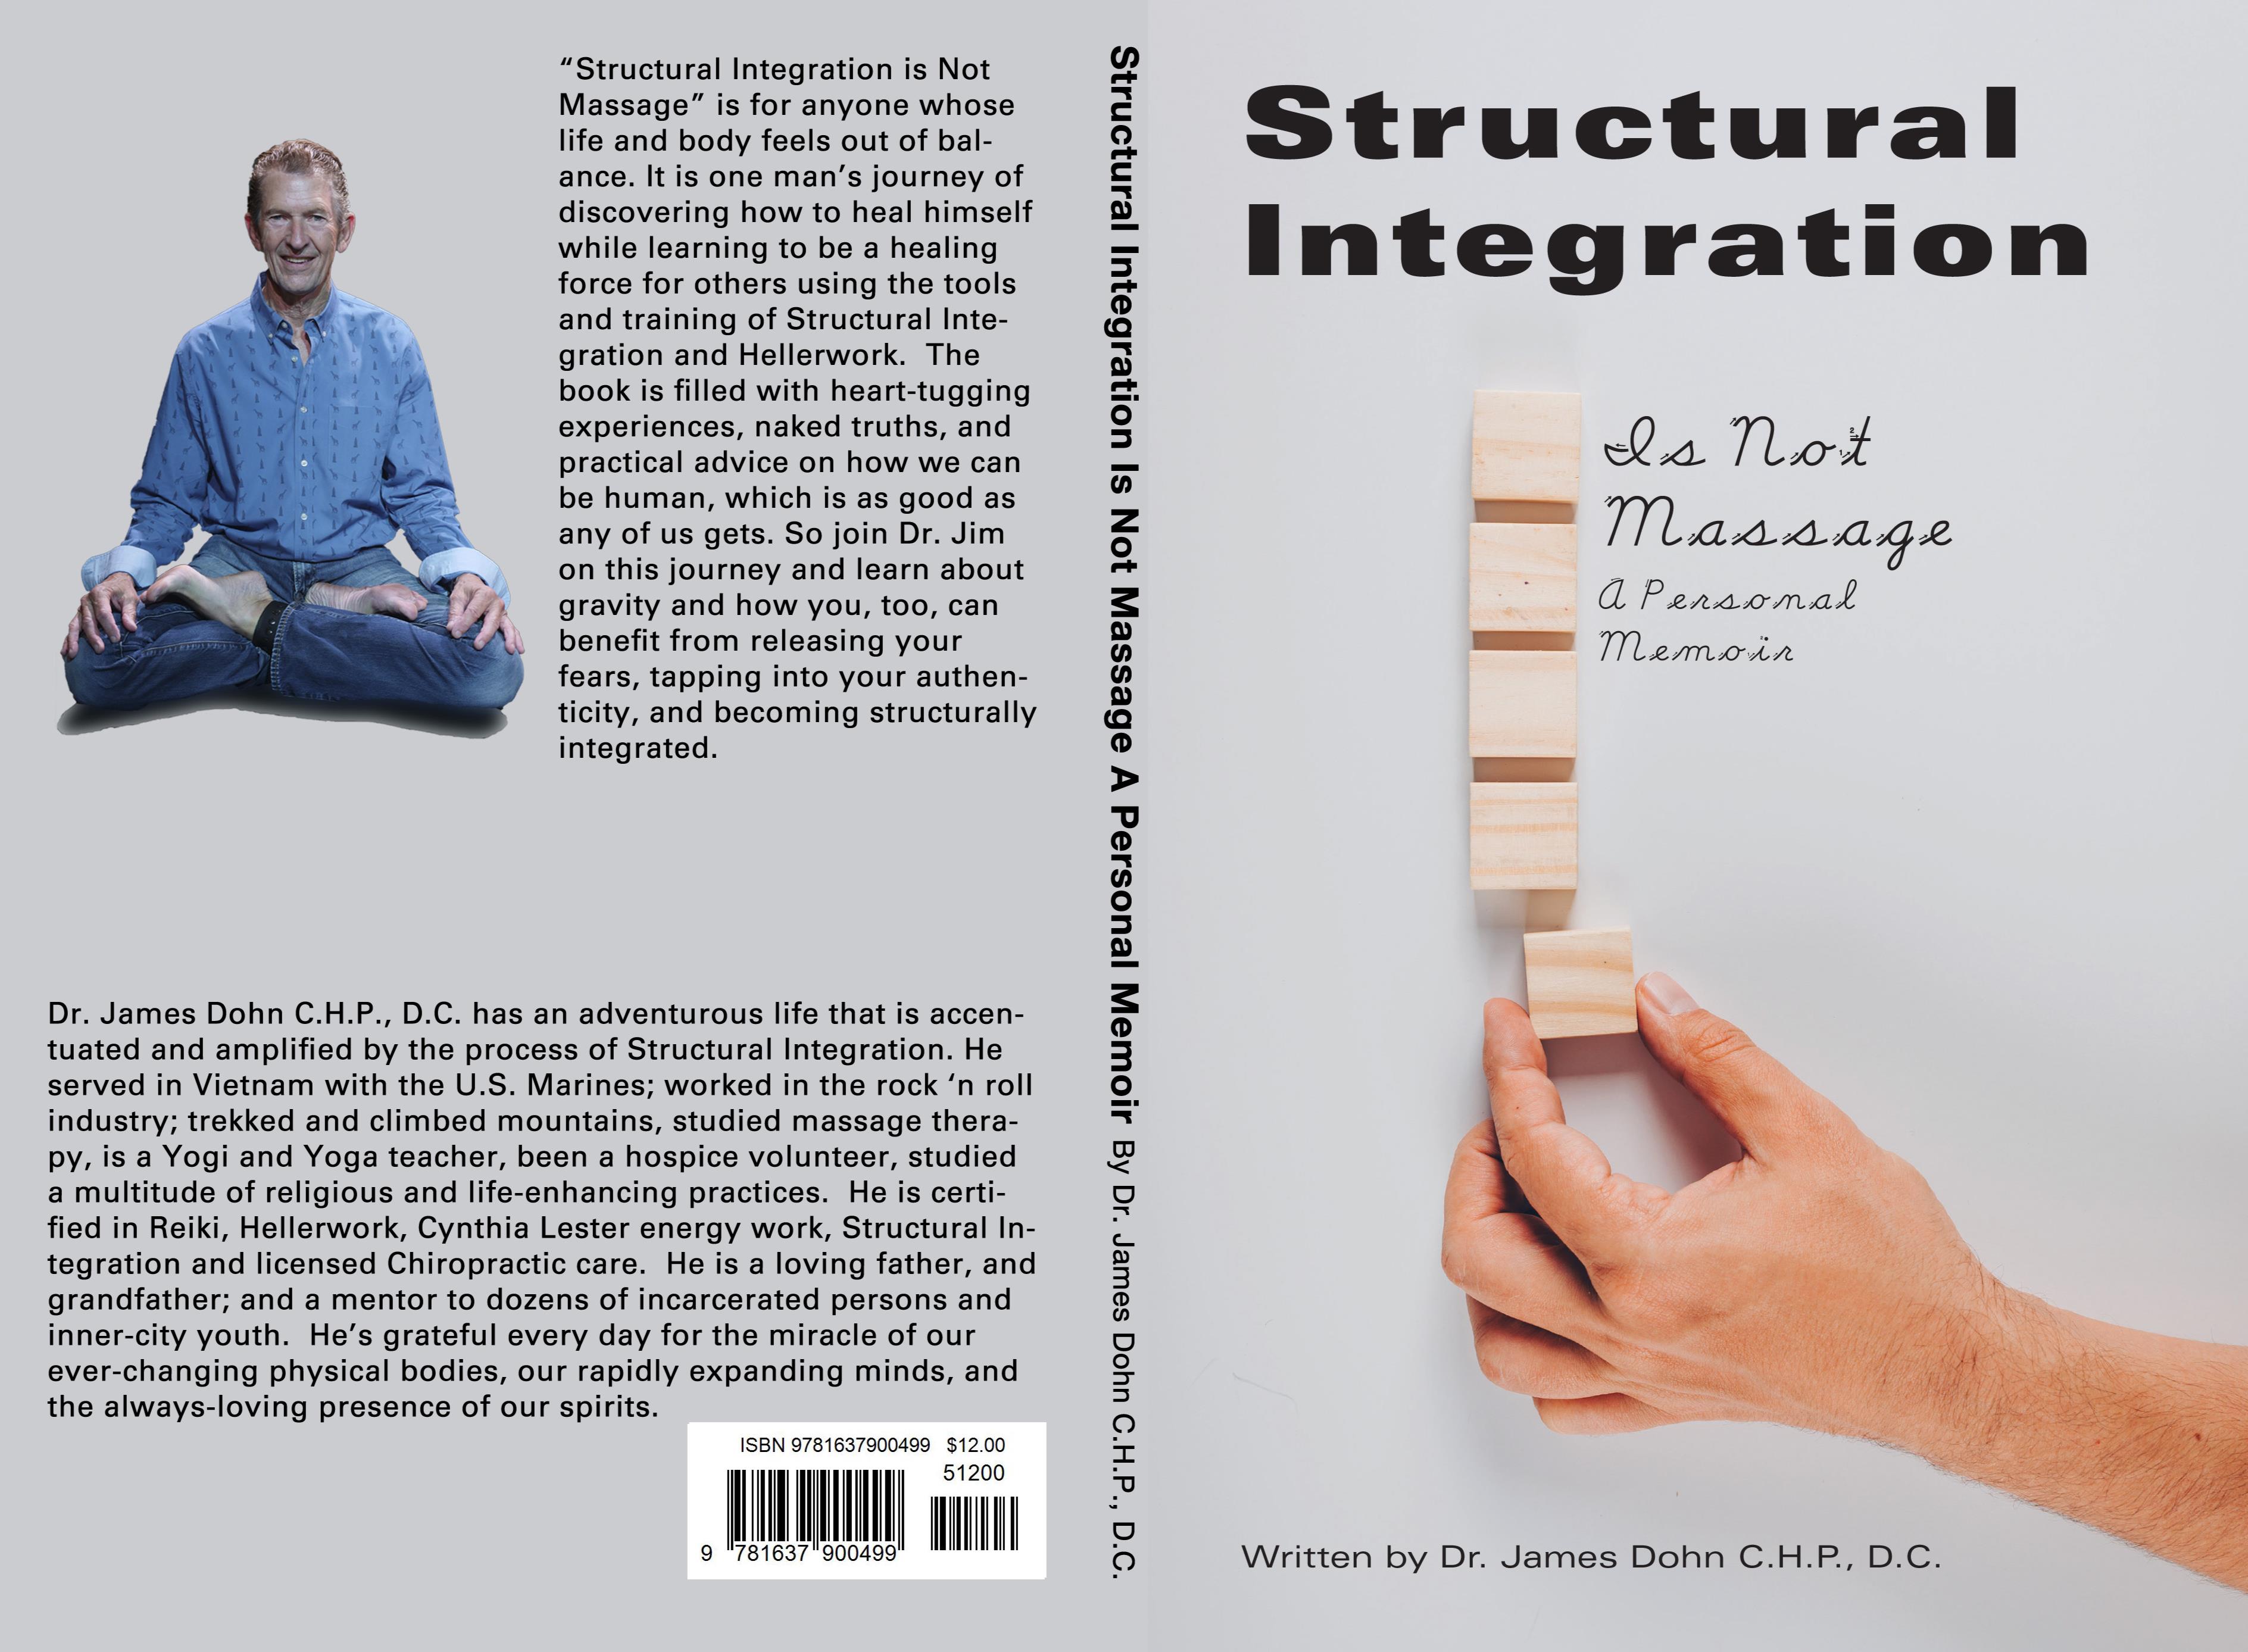 Structural Integration Is Not Massage, A Personal Memoir cover image